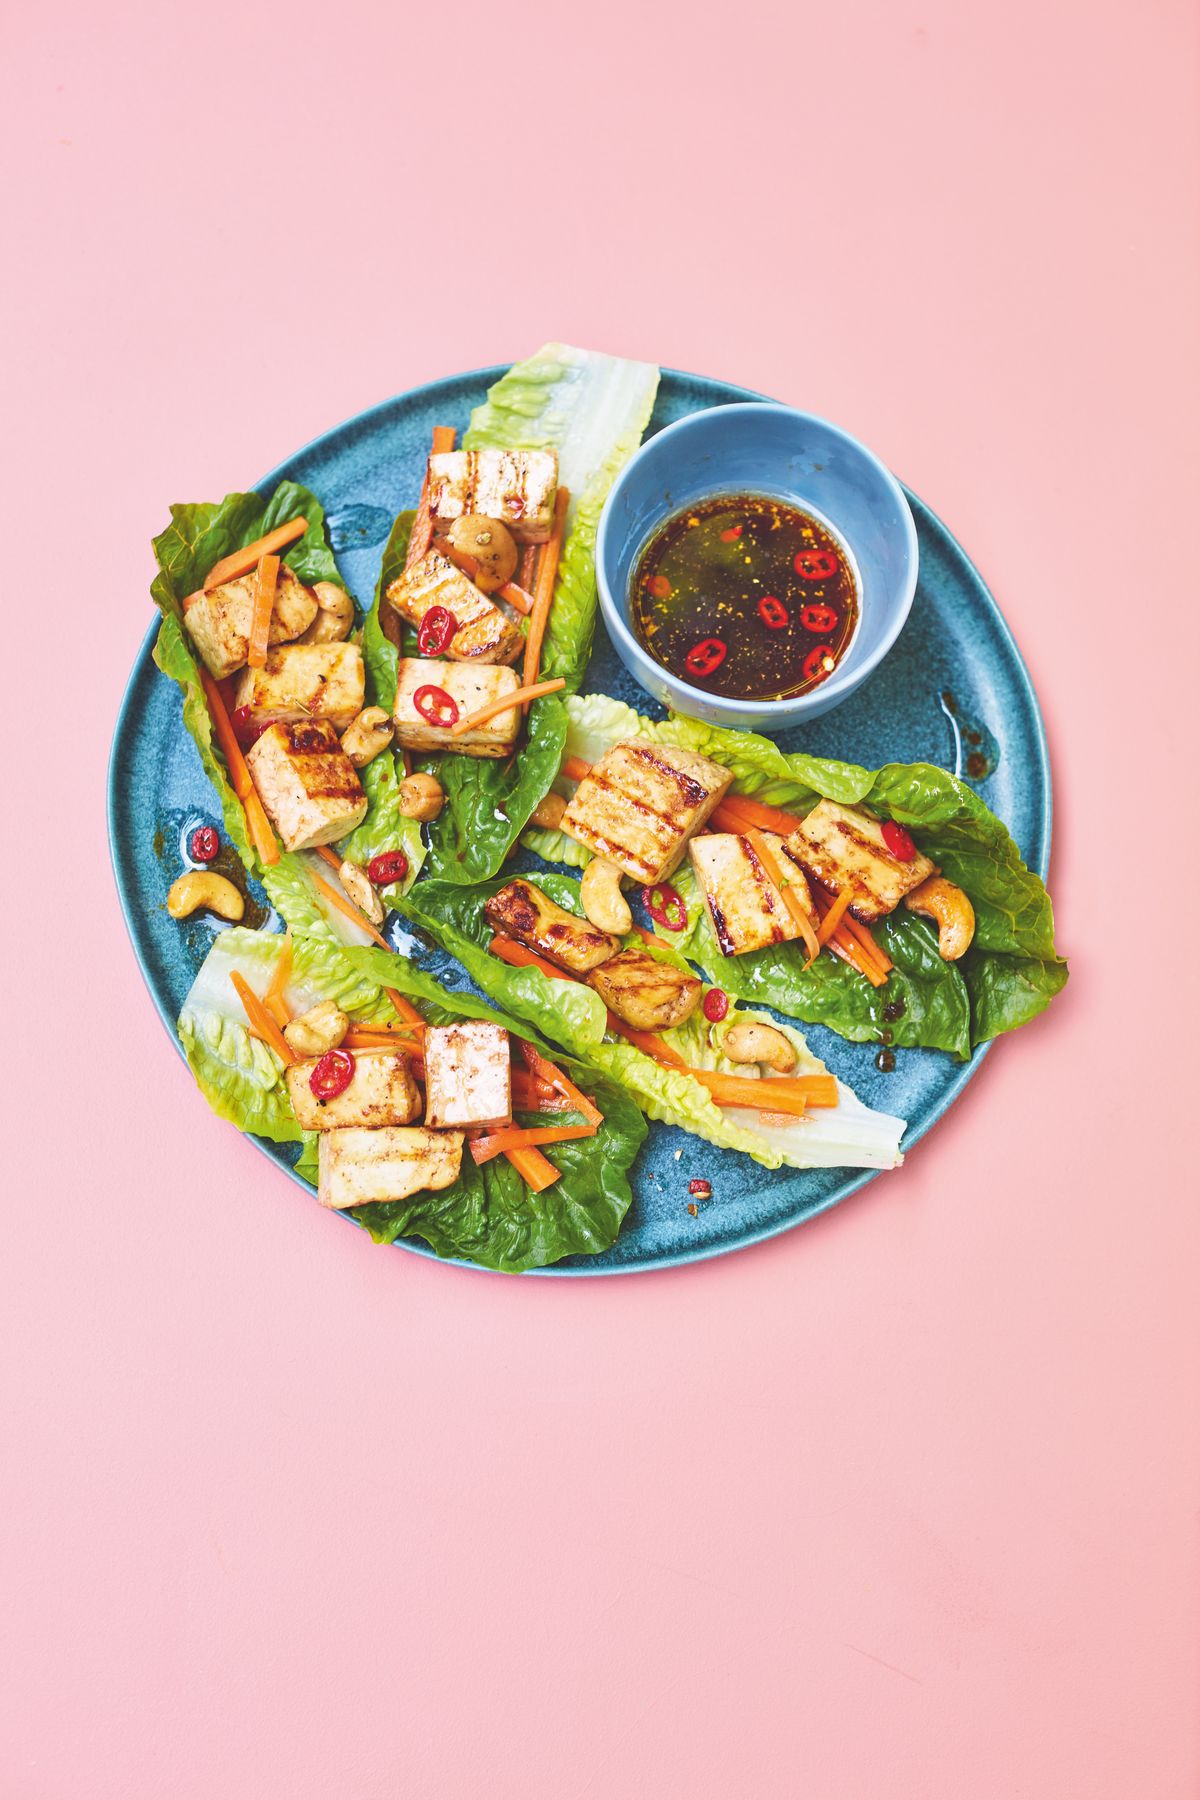 Crispy Barbecue Tofu Lettuce Wraps with Cashews, Carrots and Nuoc Cham